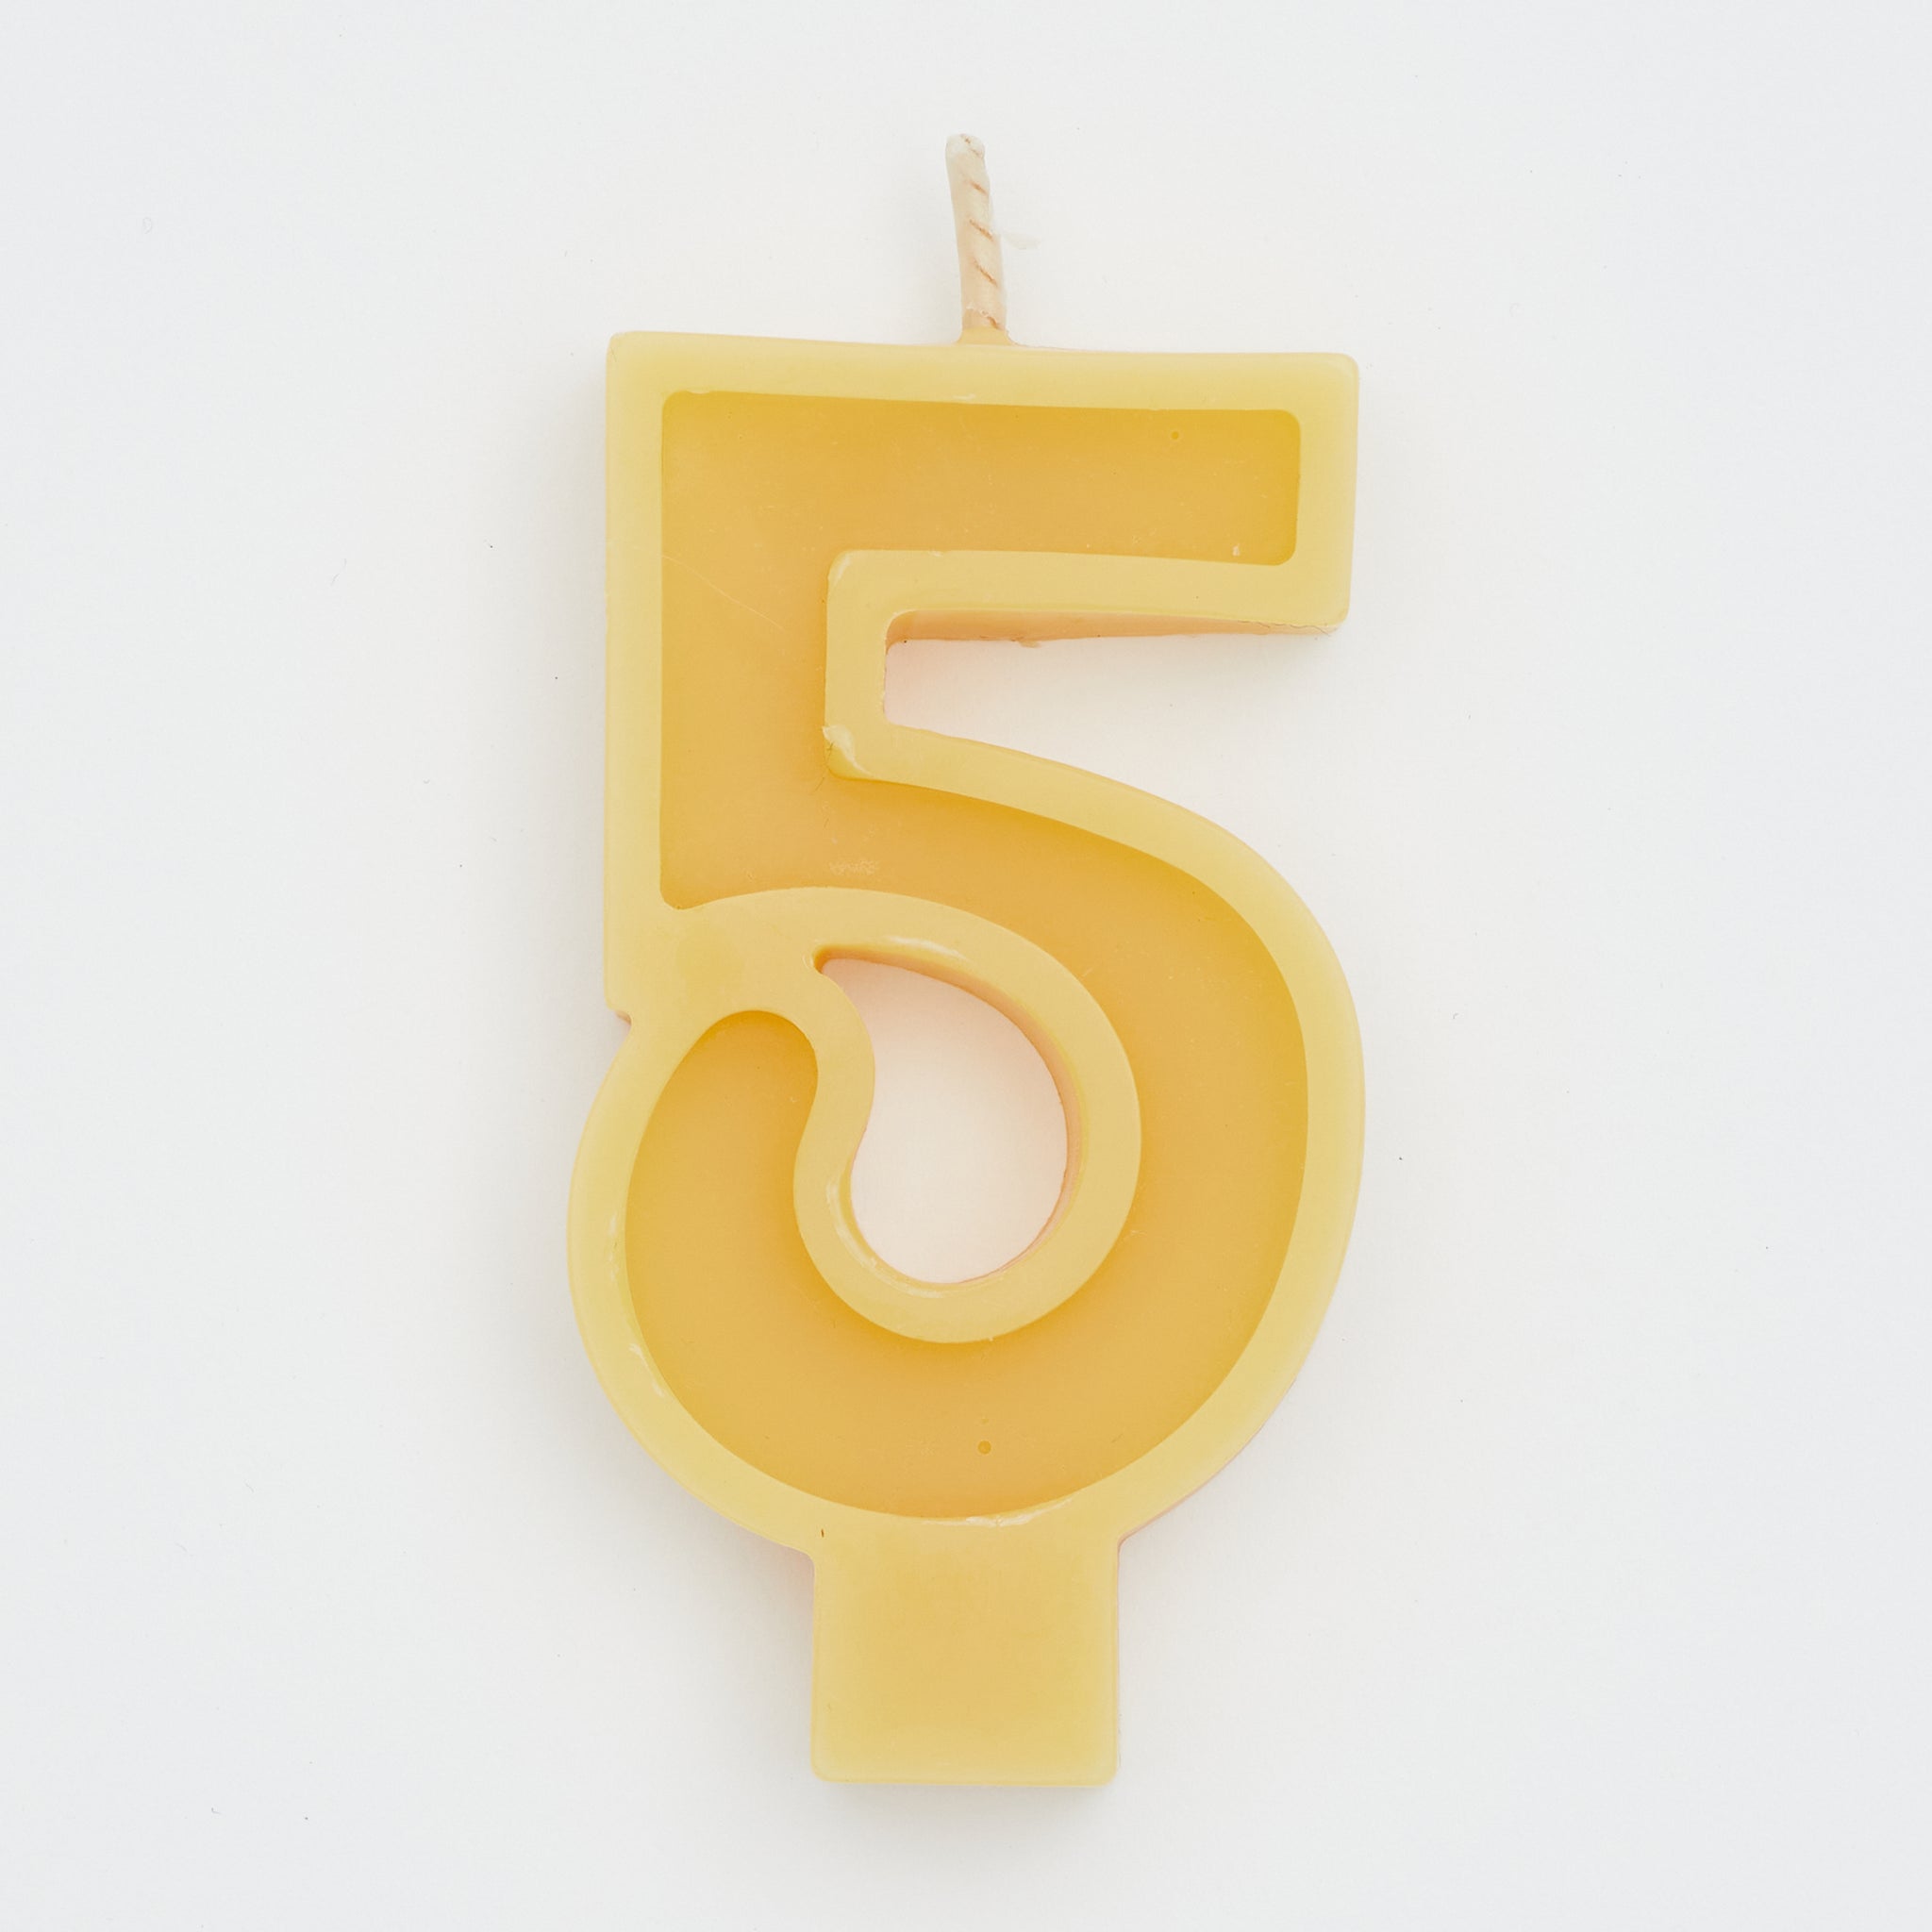 Blake & Mason Beeswax Celebration Number 5 Candles | made in Australia